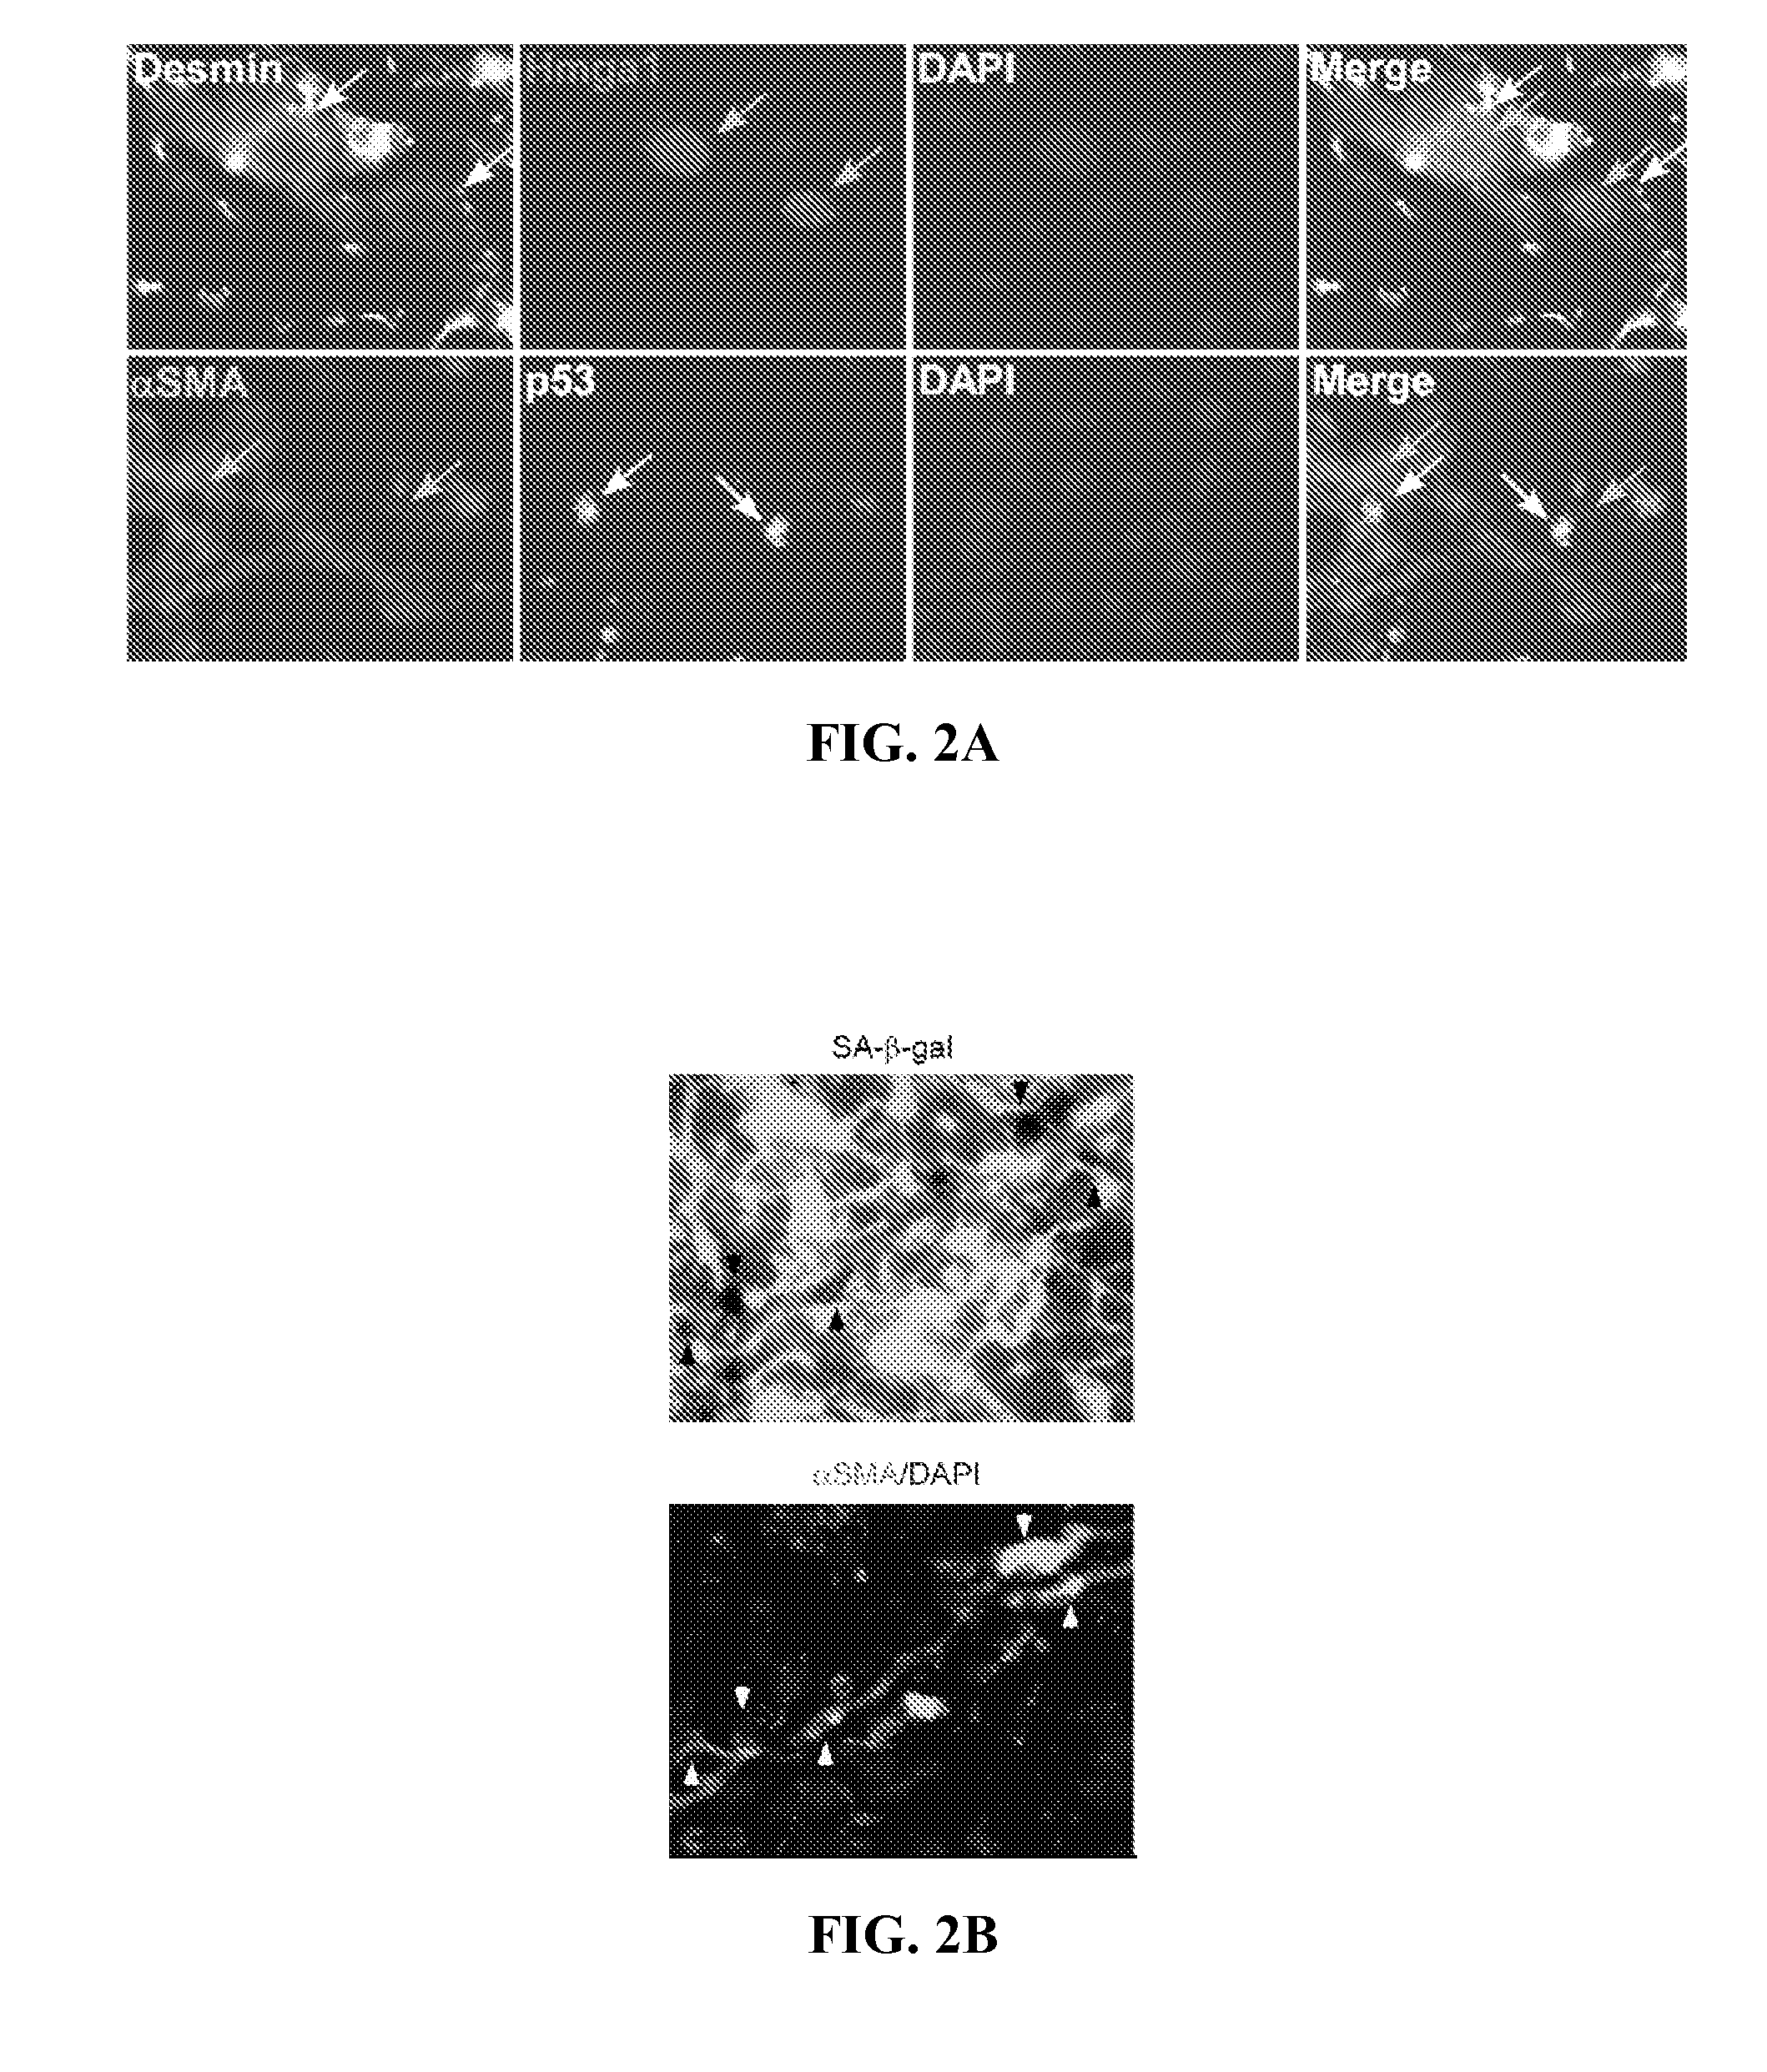 Methods for treating fibrosis by modulating cellular senescence